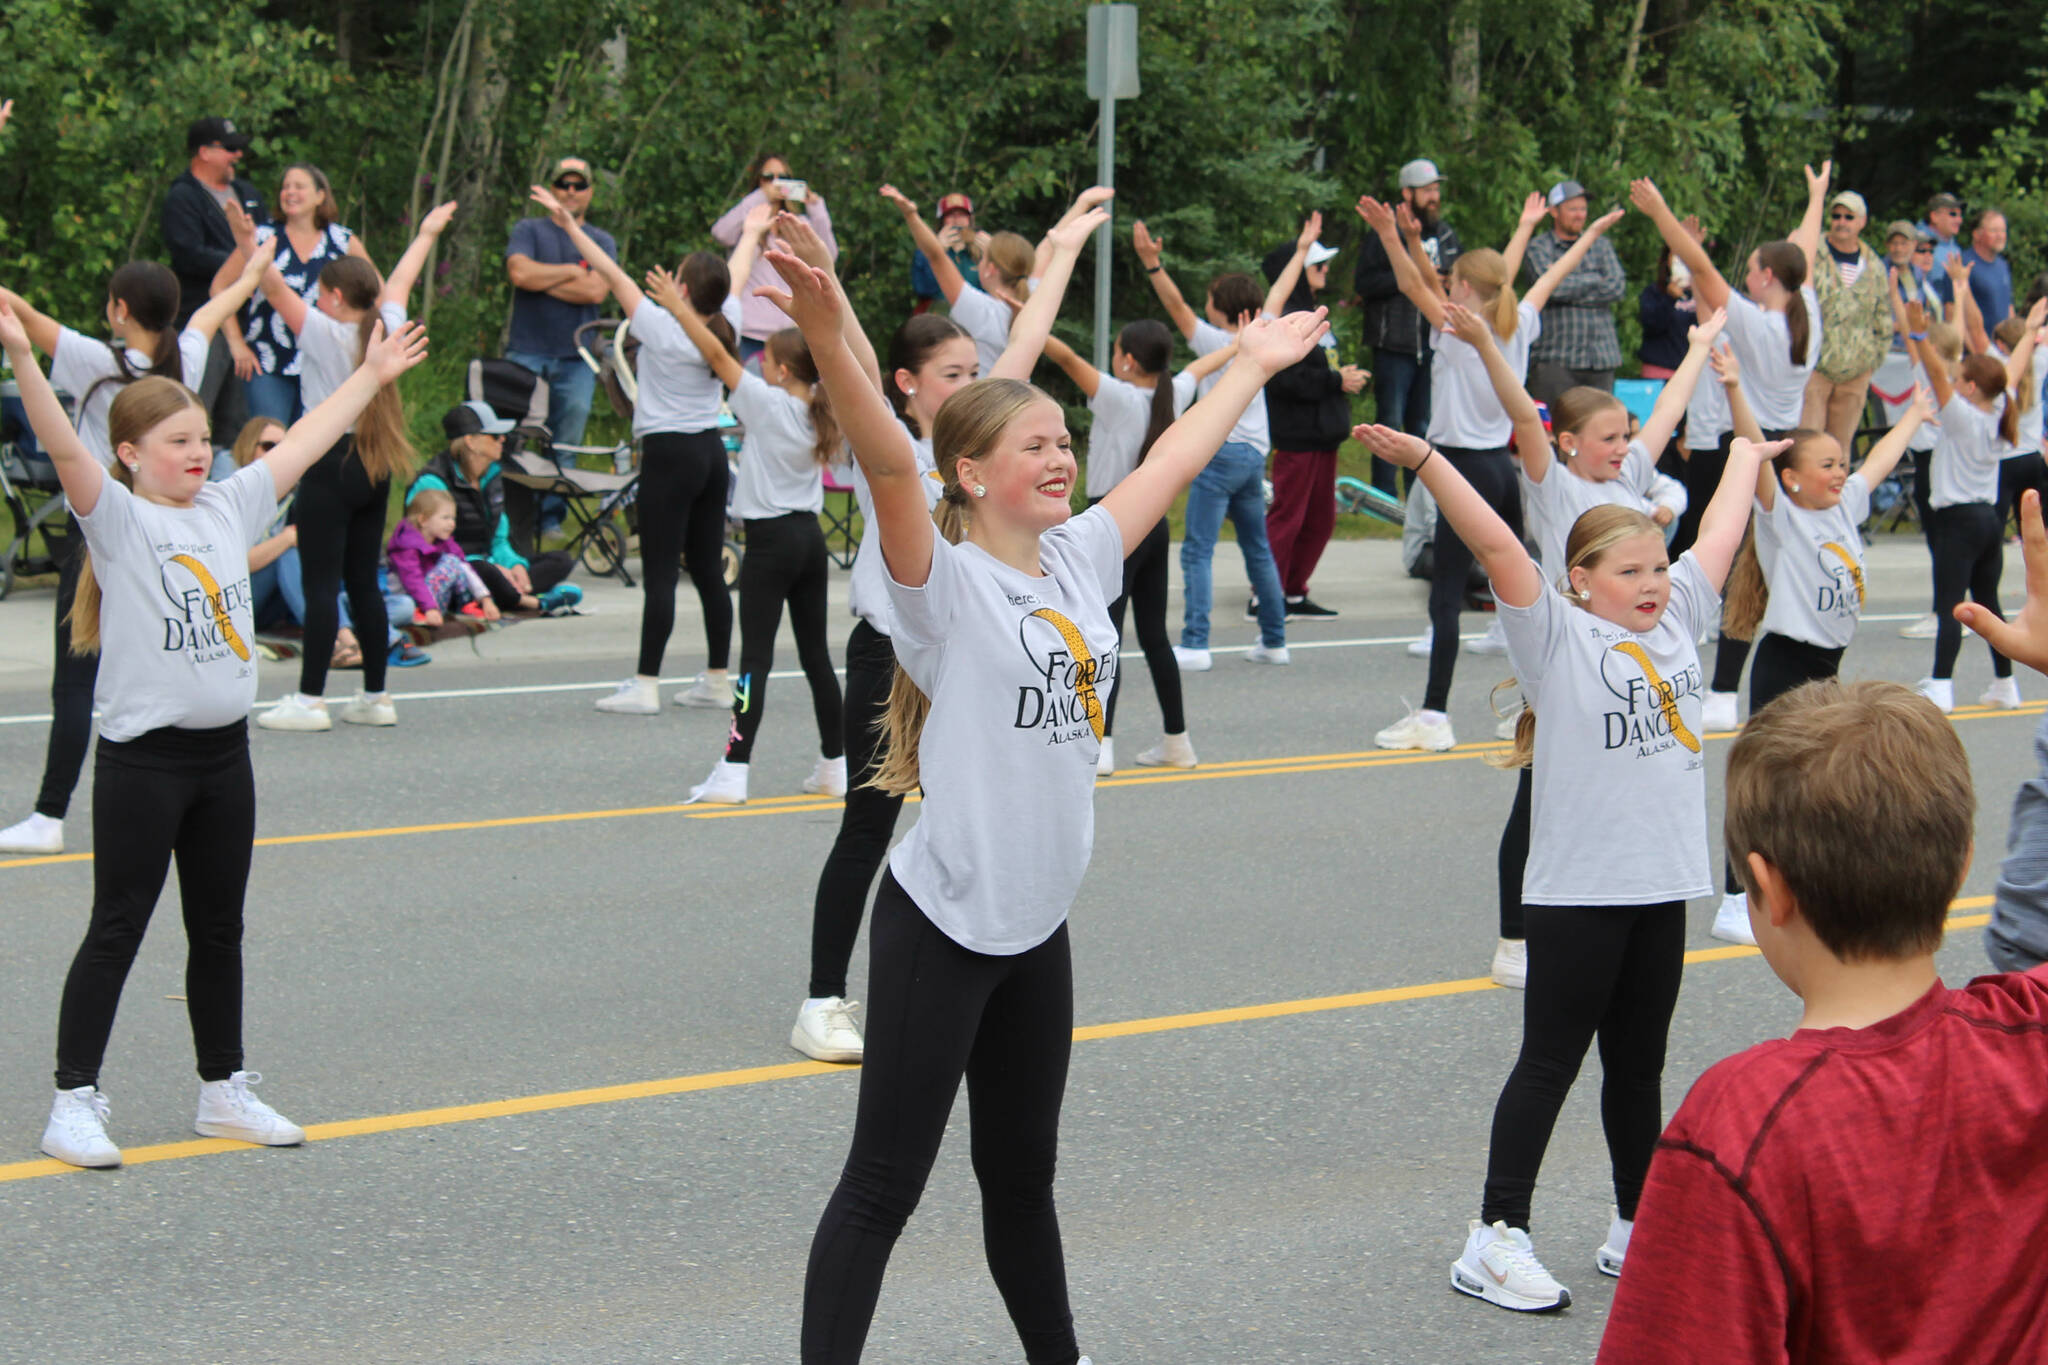 Performers with Forever Dance participate in the 65th annual Soldotna Progress Days Parade on Saturday, July 23, 2022, in Soldotna, Alaska. (Ashlyn O’Hara/Peninsula Clarion)